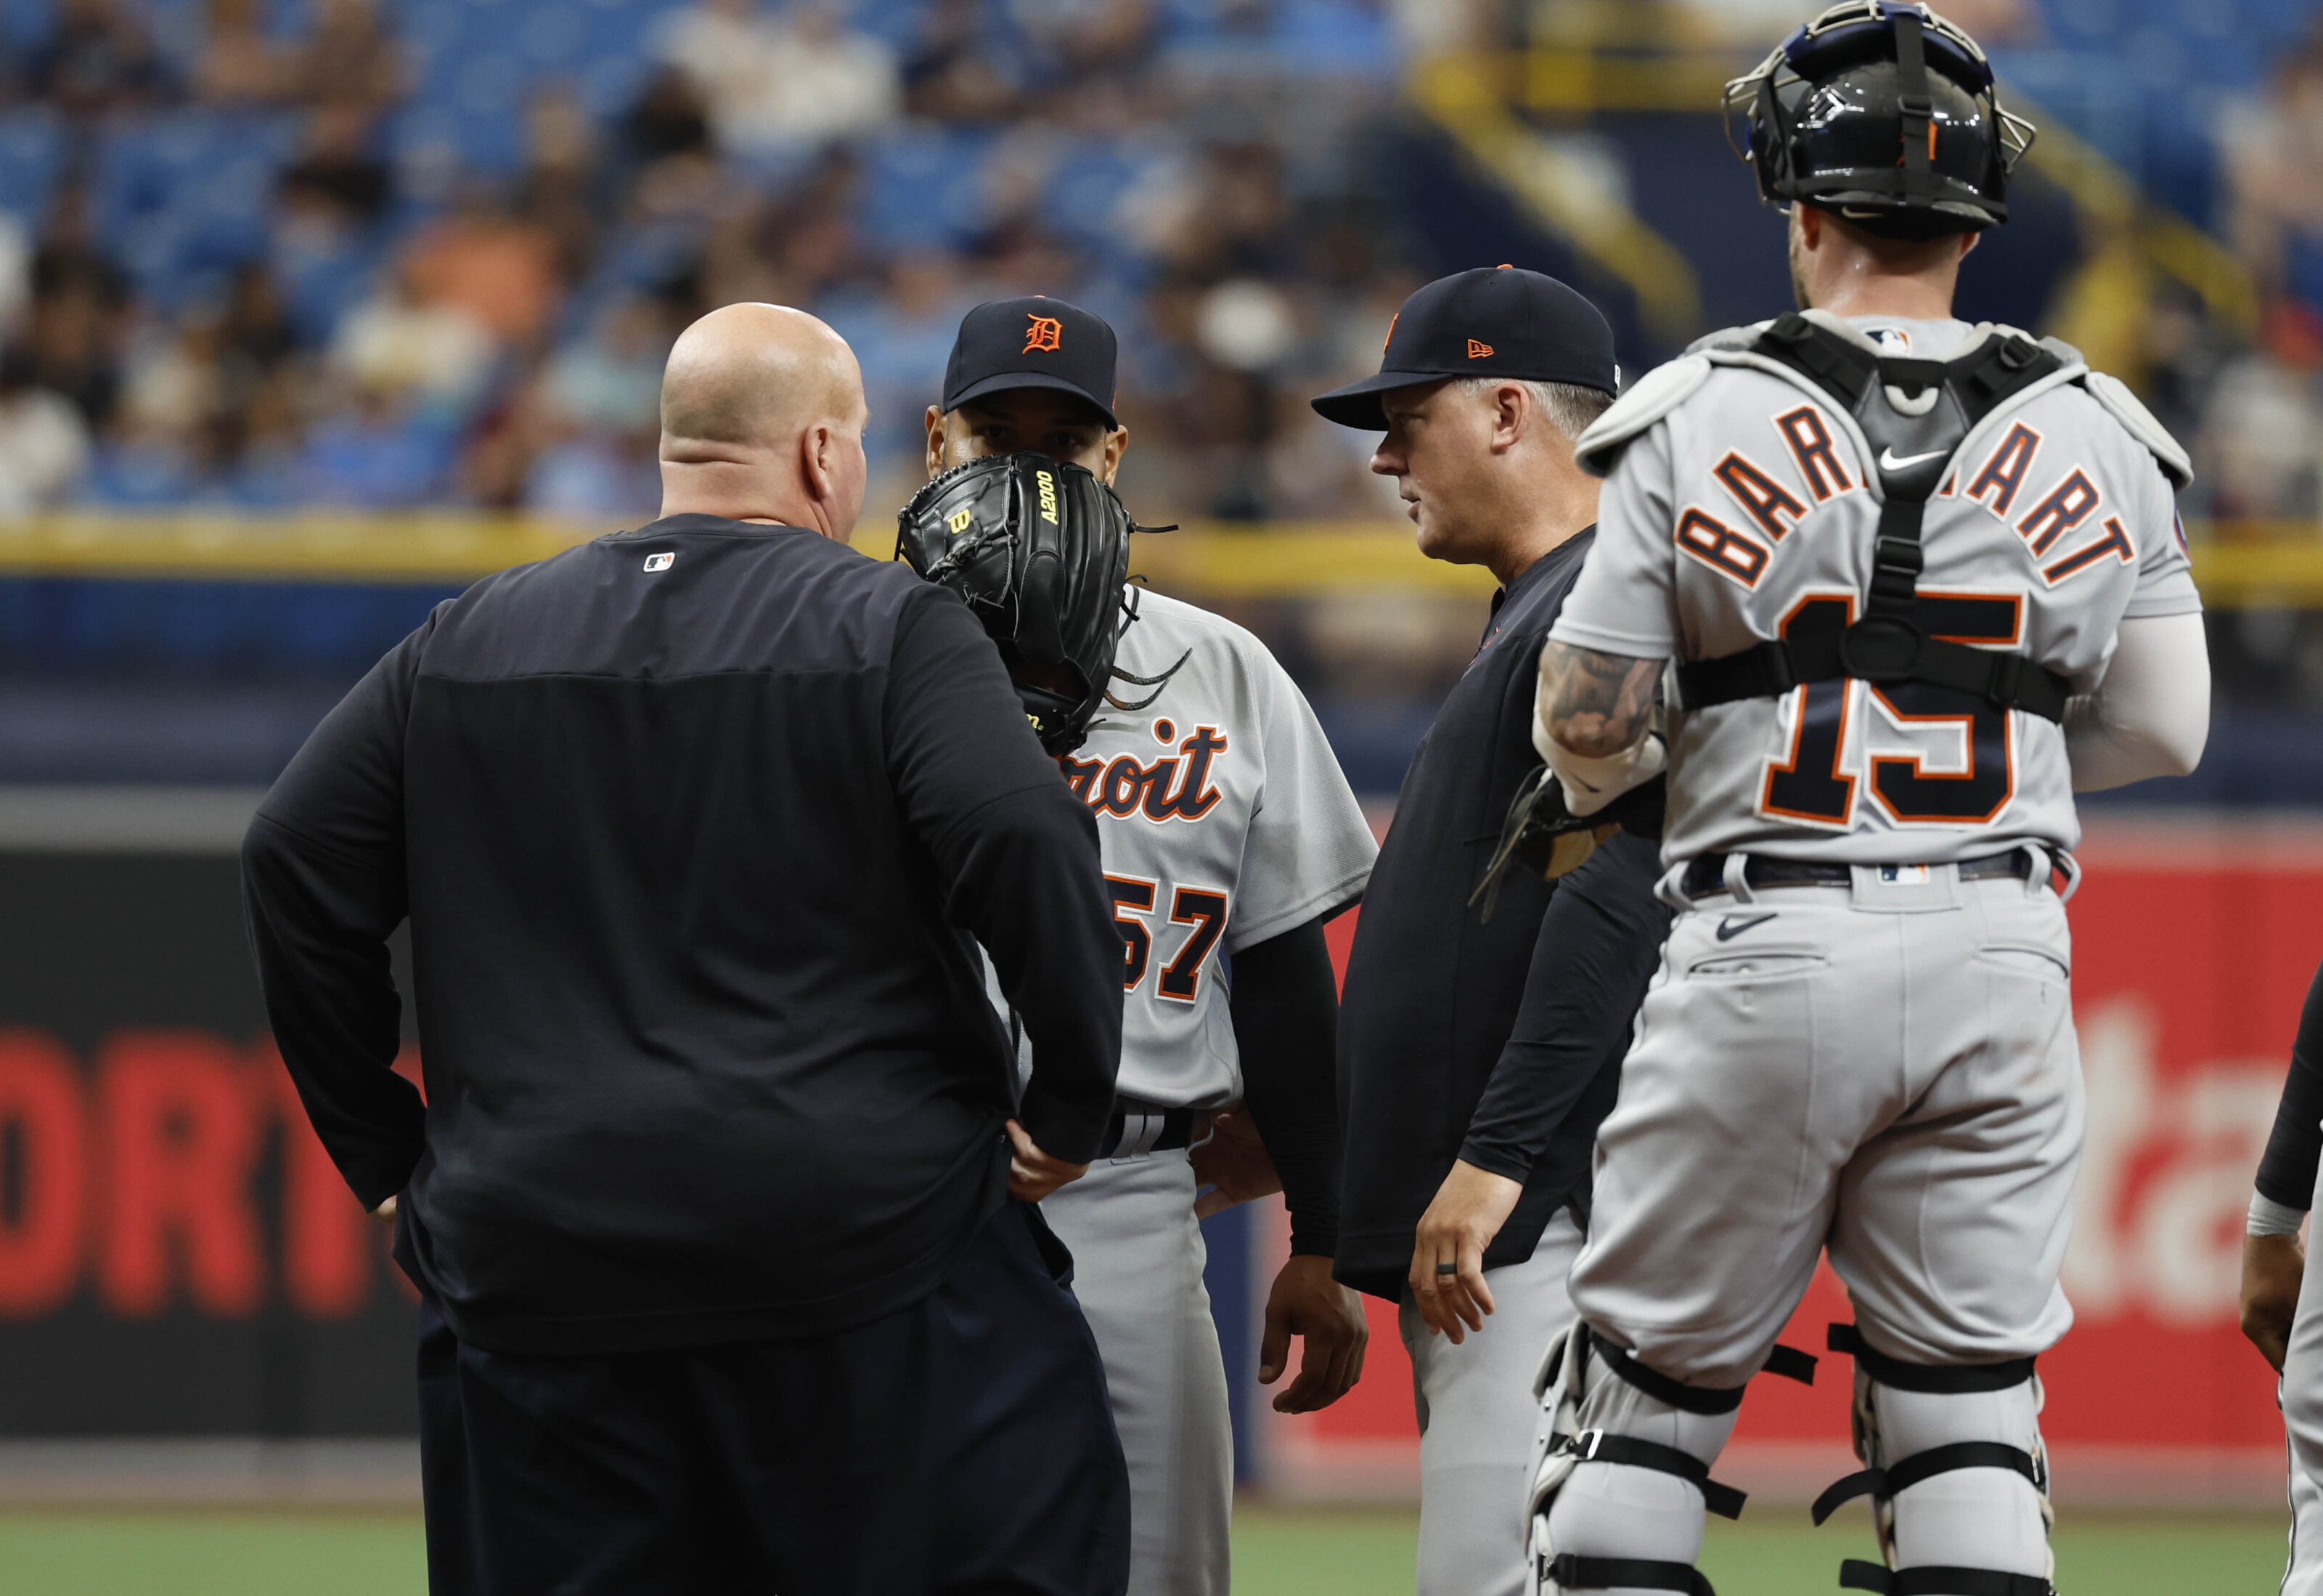 Casey Mize expected to start for Tigers against Rays